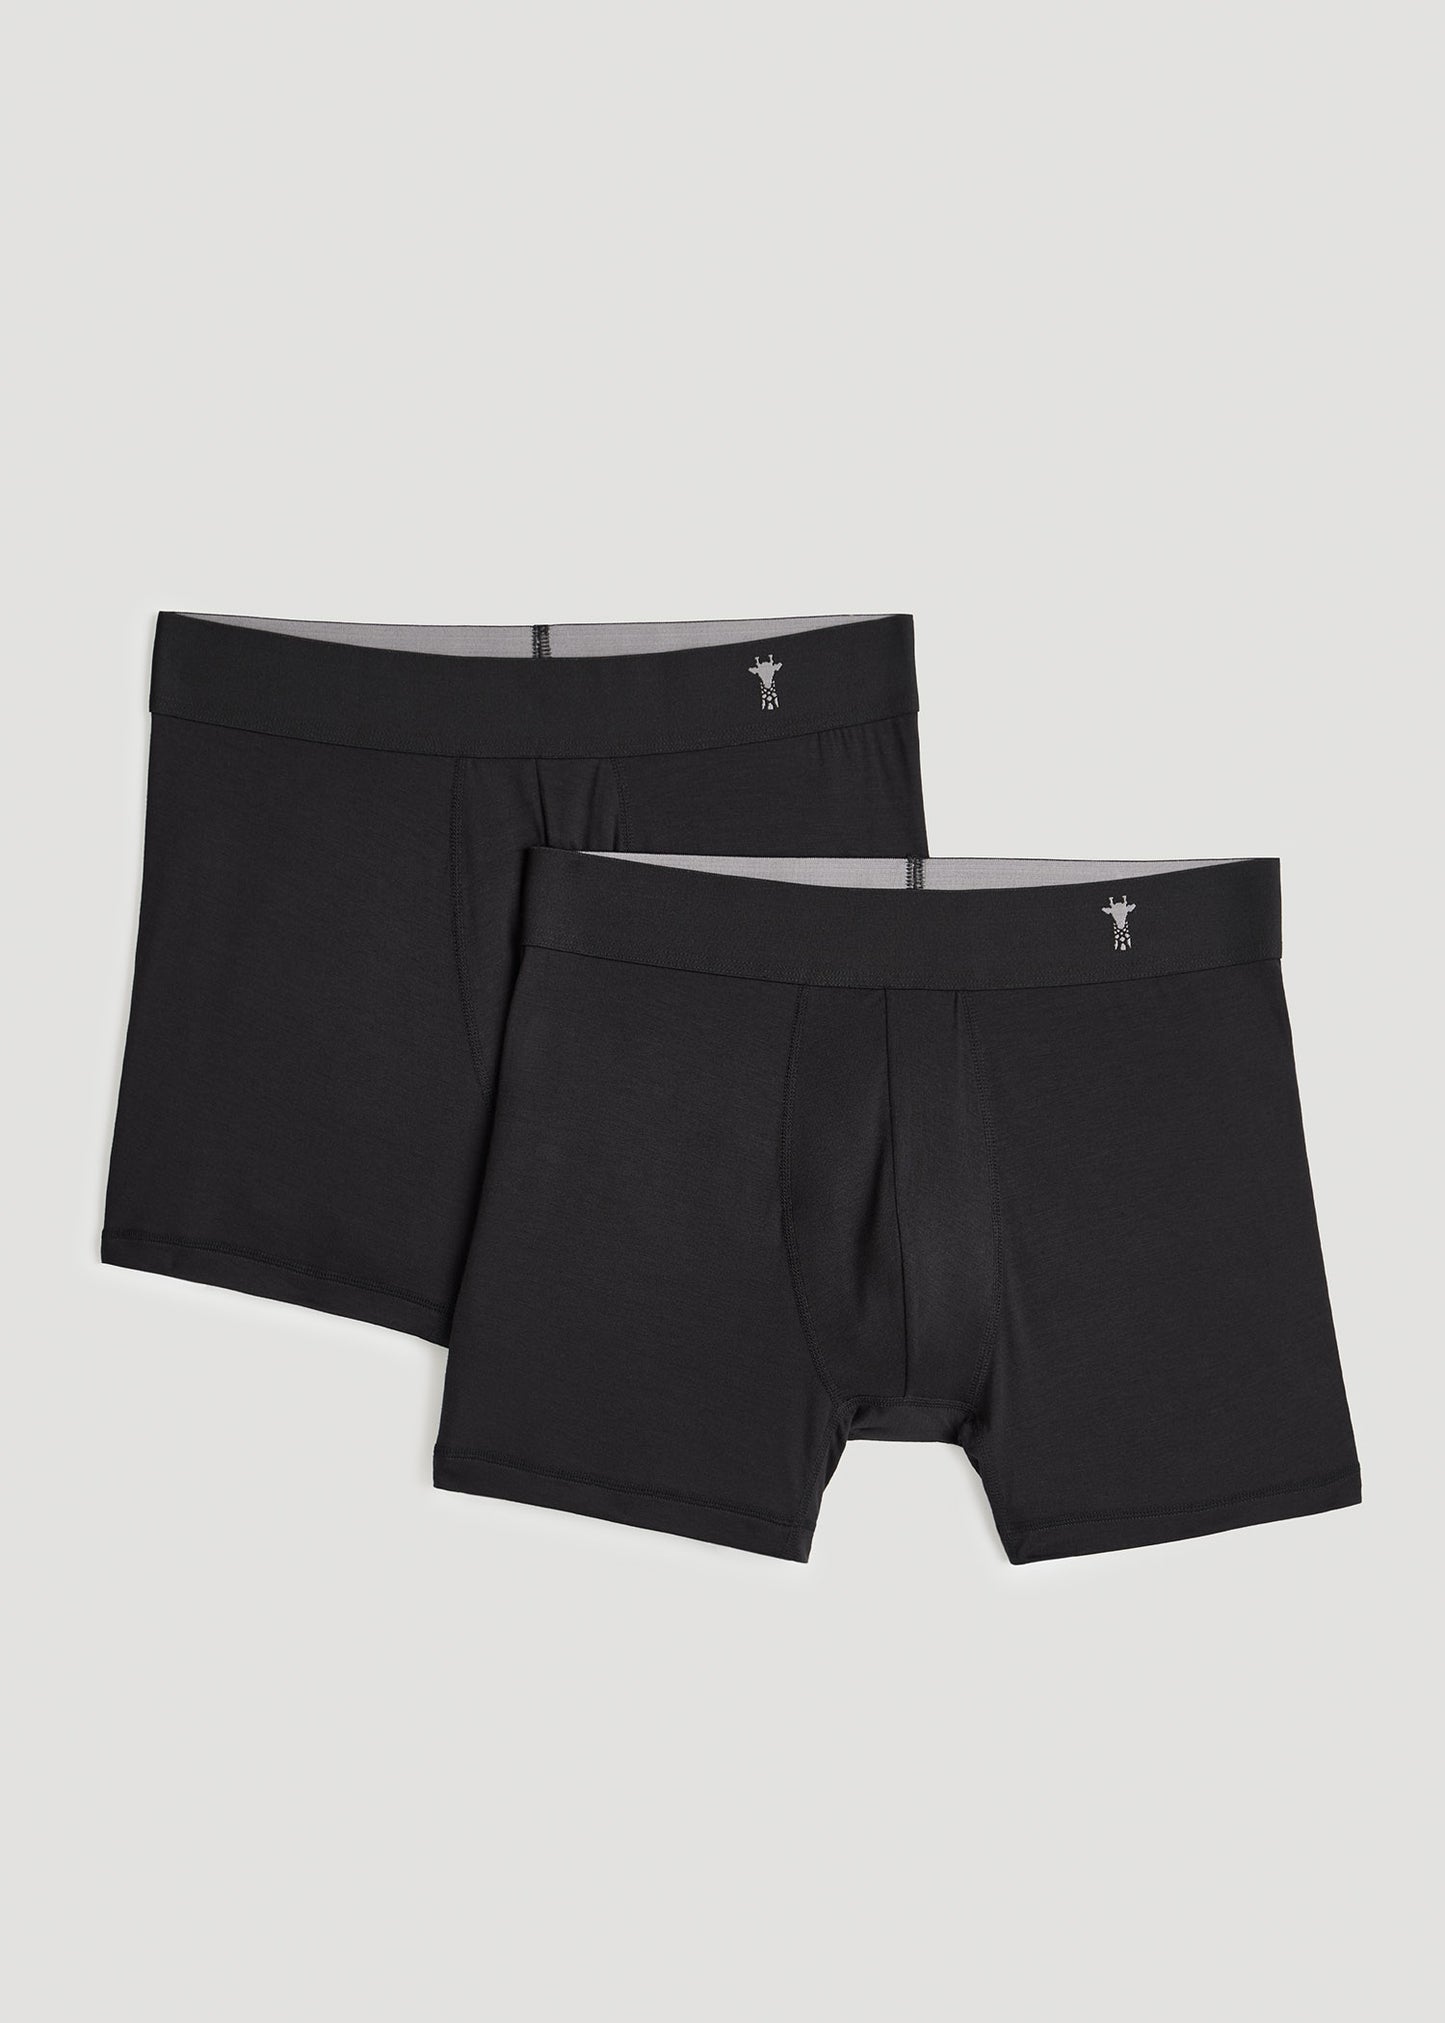 Micro Modal Extra-Long Boxer Briefs in Black (2-Pack) – American Tall